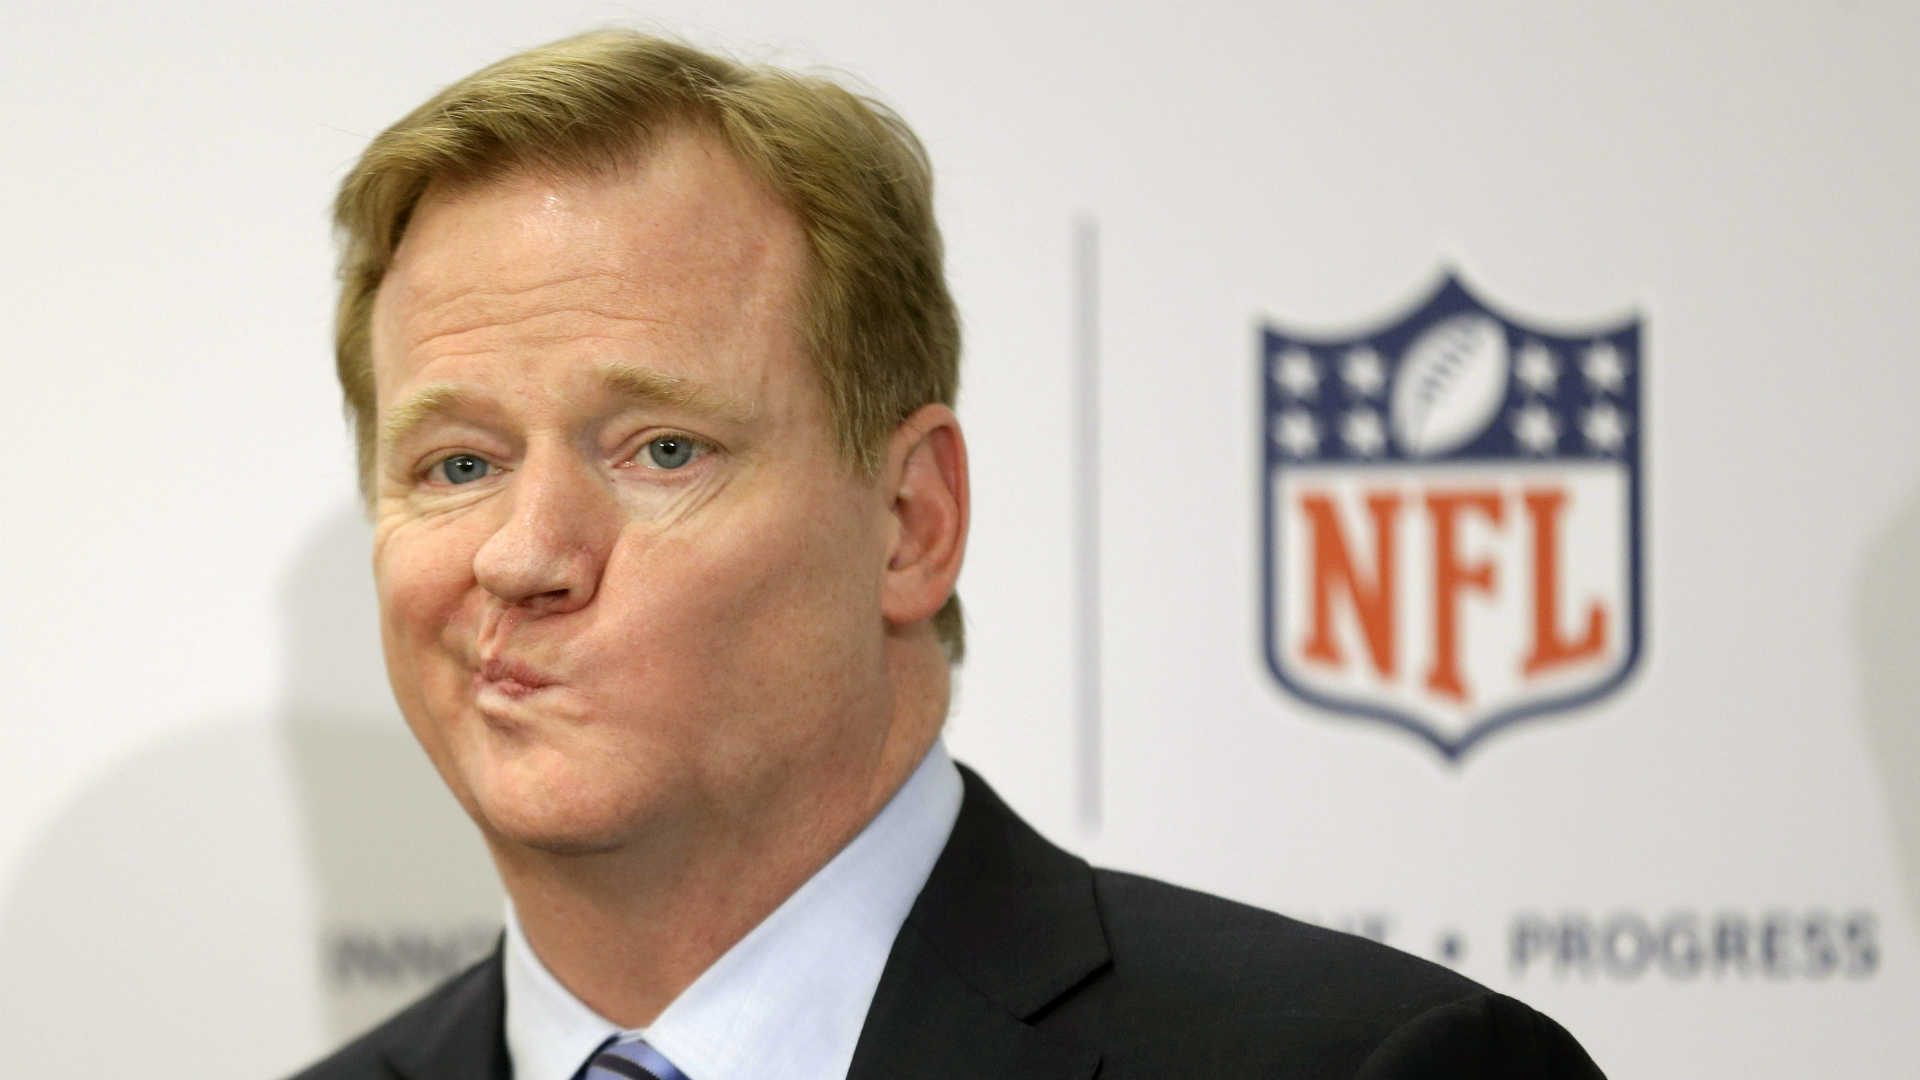 Goodell blasted for reaction to NFL draft controversy